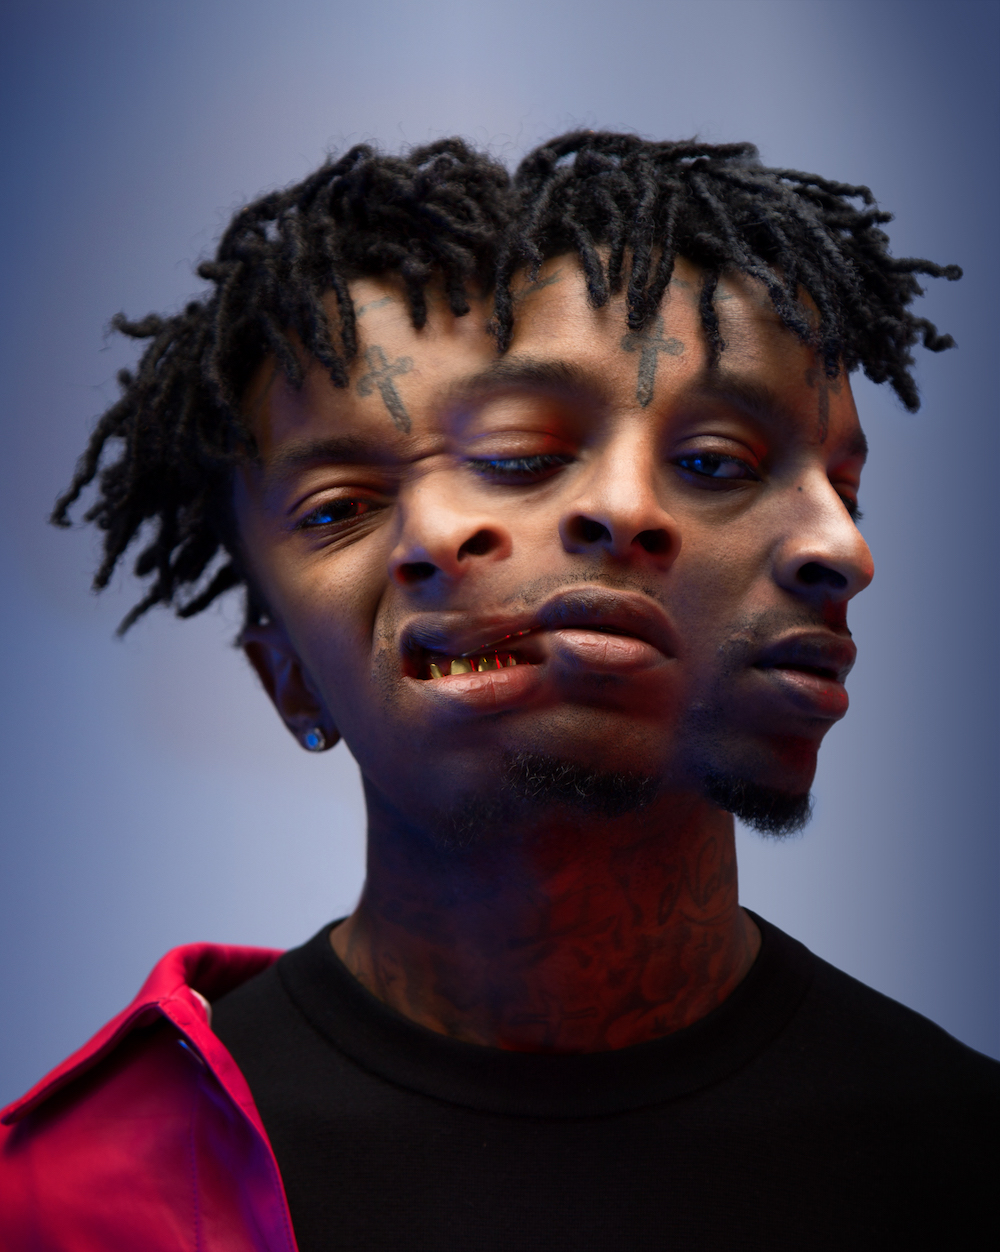 21 Savage Just Jared: Celebrity Gossip and Breaking Entertainment